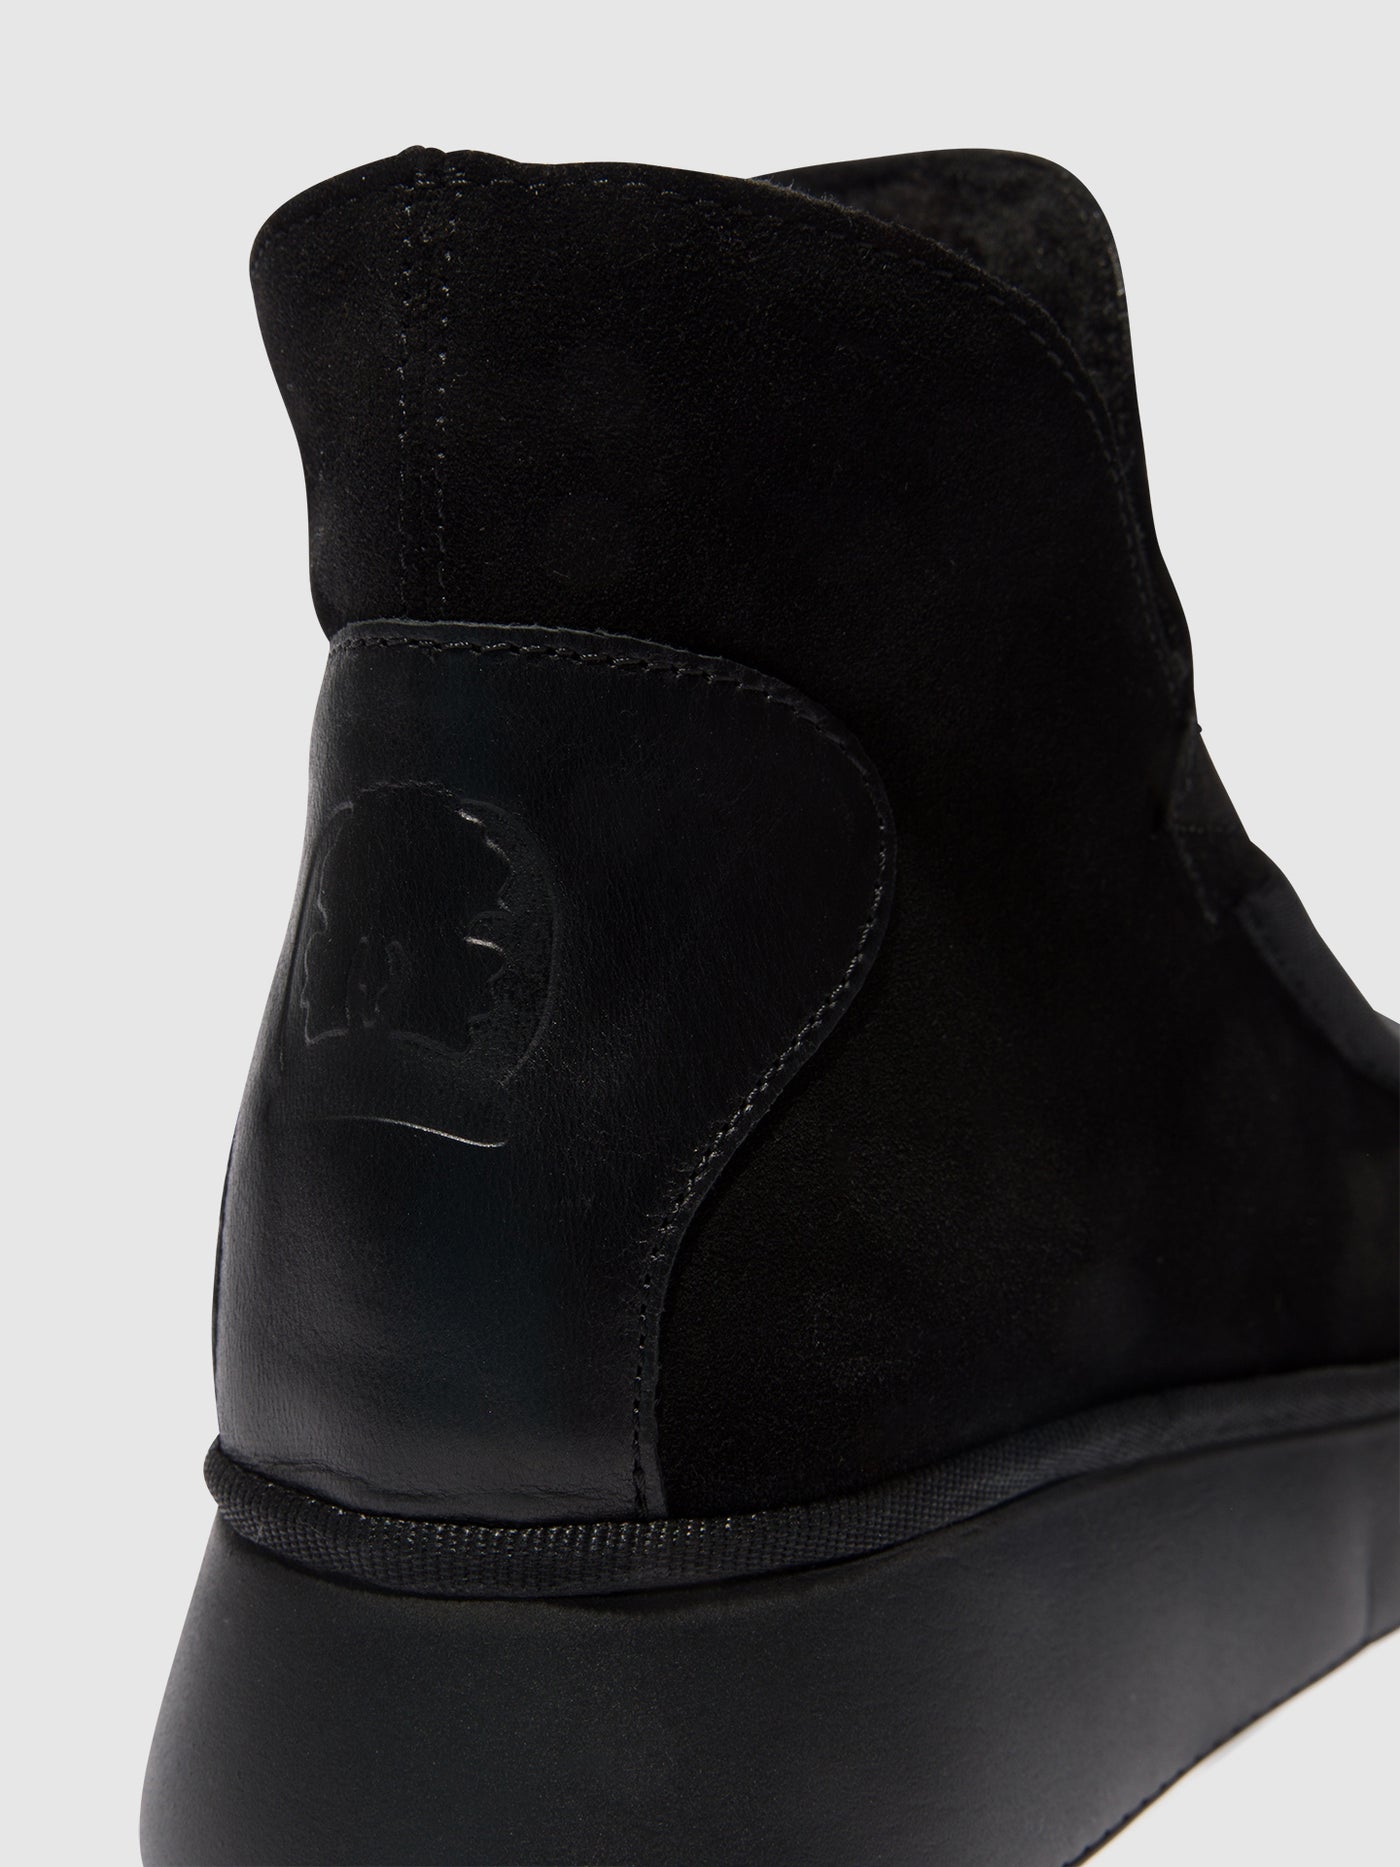 Round Toe Ankle Boots COZE348FLY BLACK